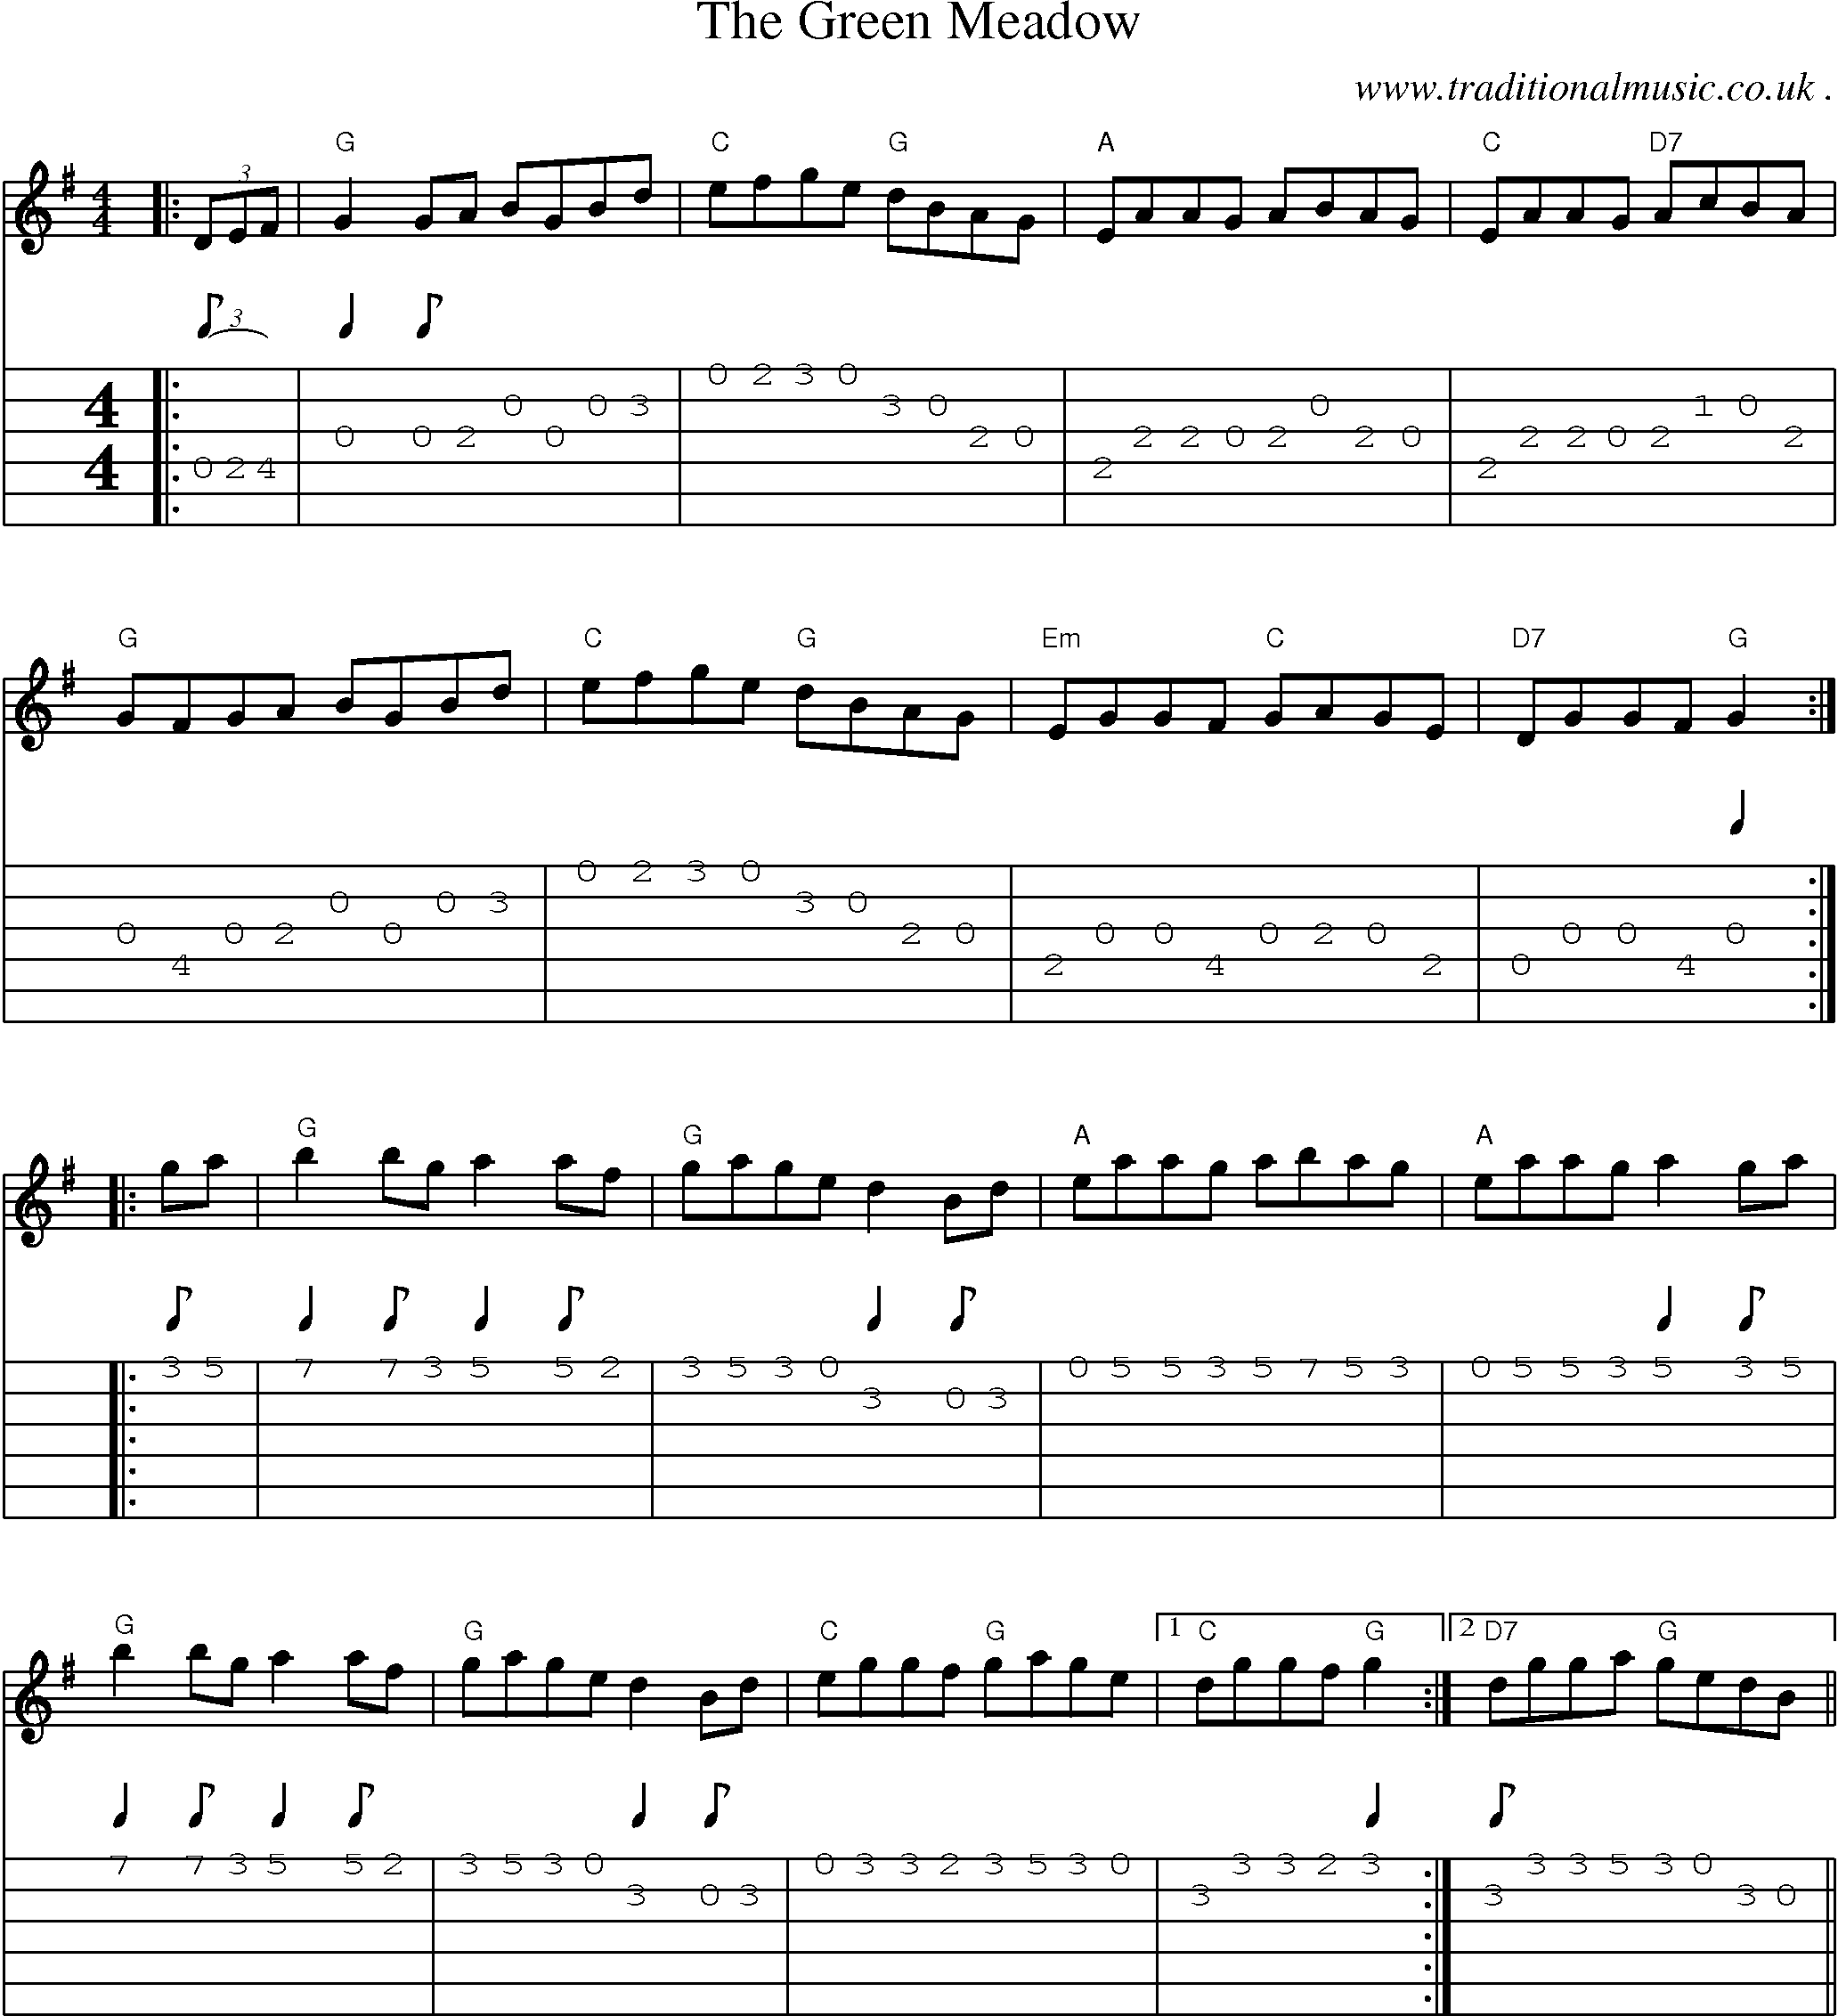 Music Score and Guitar Tabs for The Green Meadow